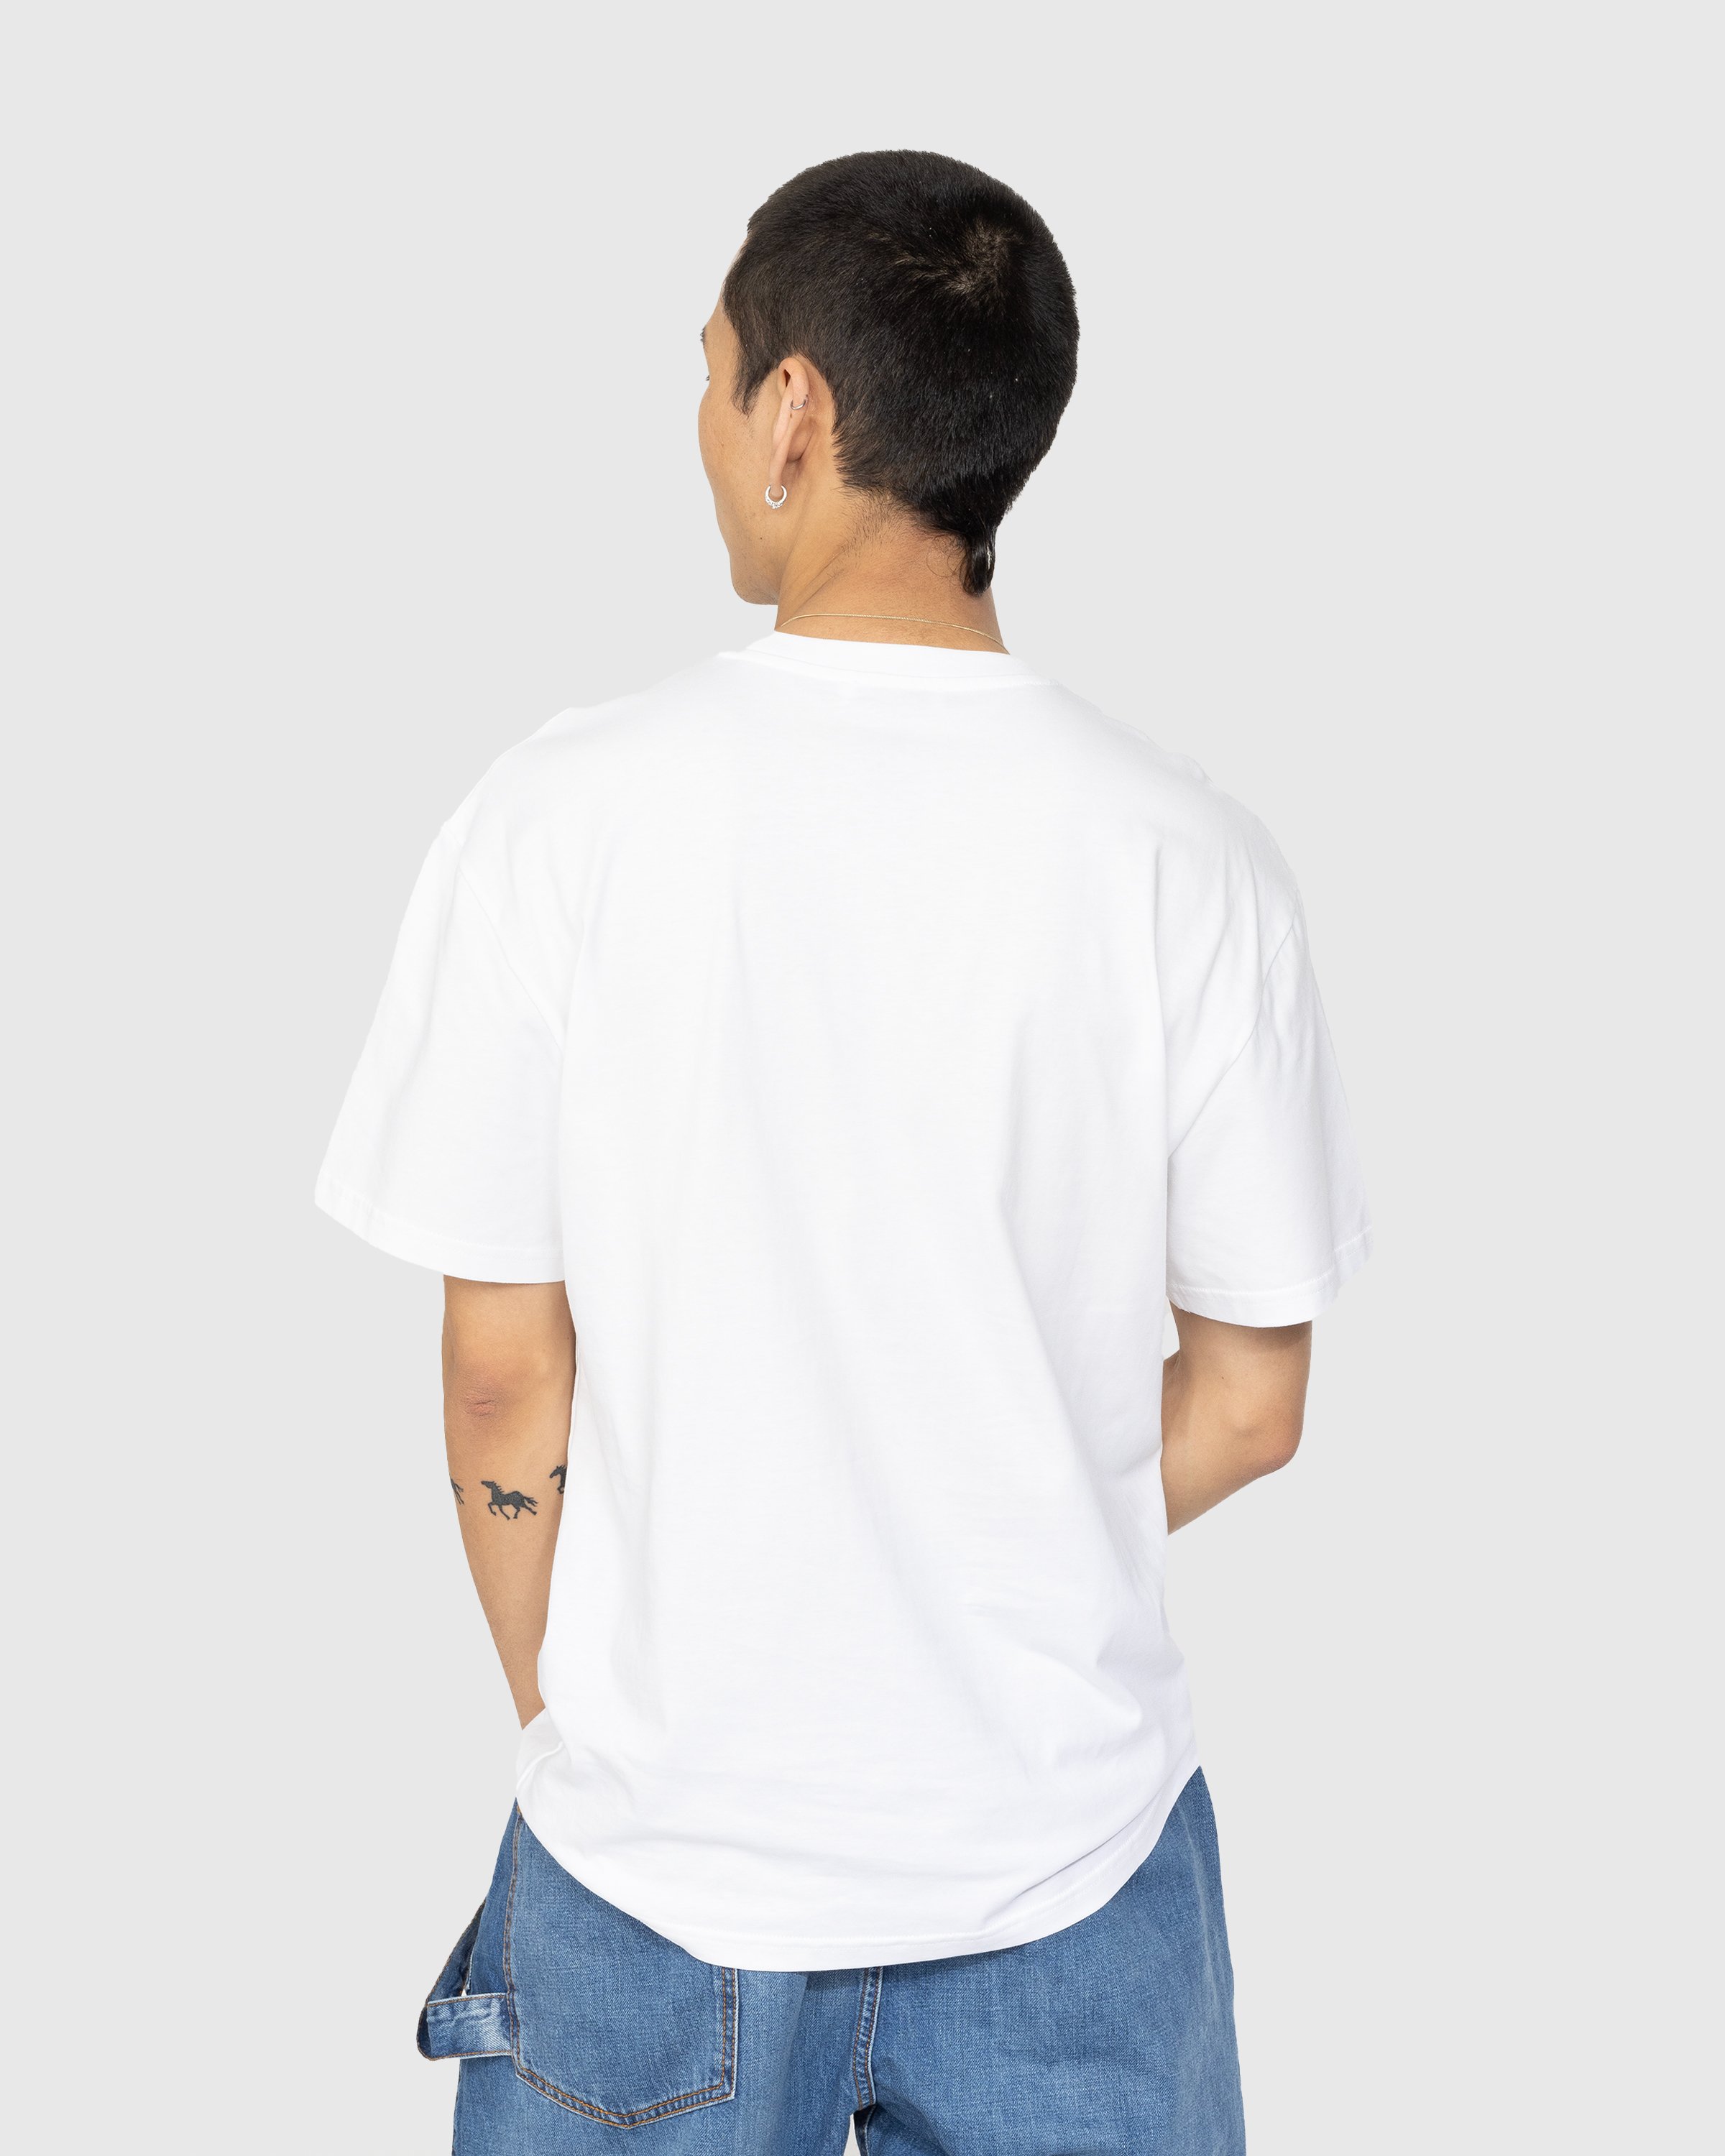 J.W. Anderson - Anchor Patch T-Shirt White - Clothing - White - Image 3